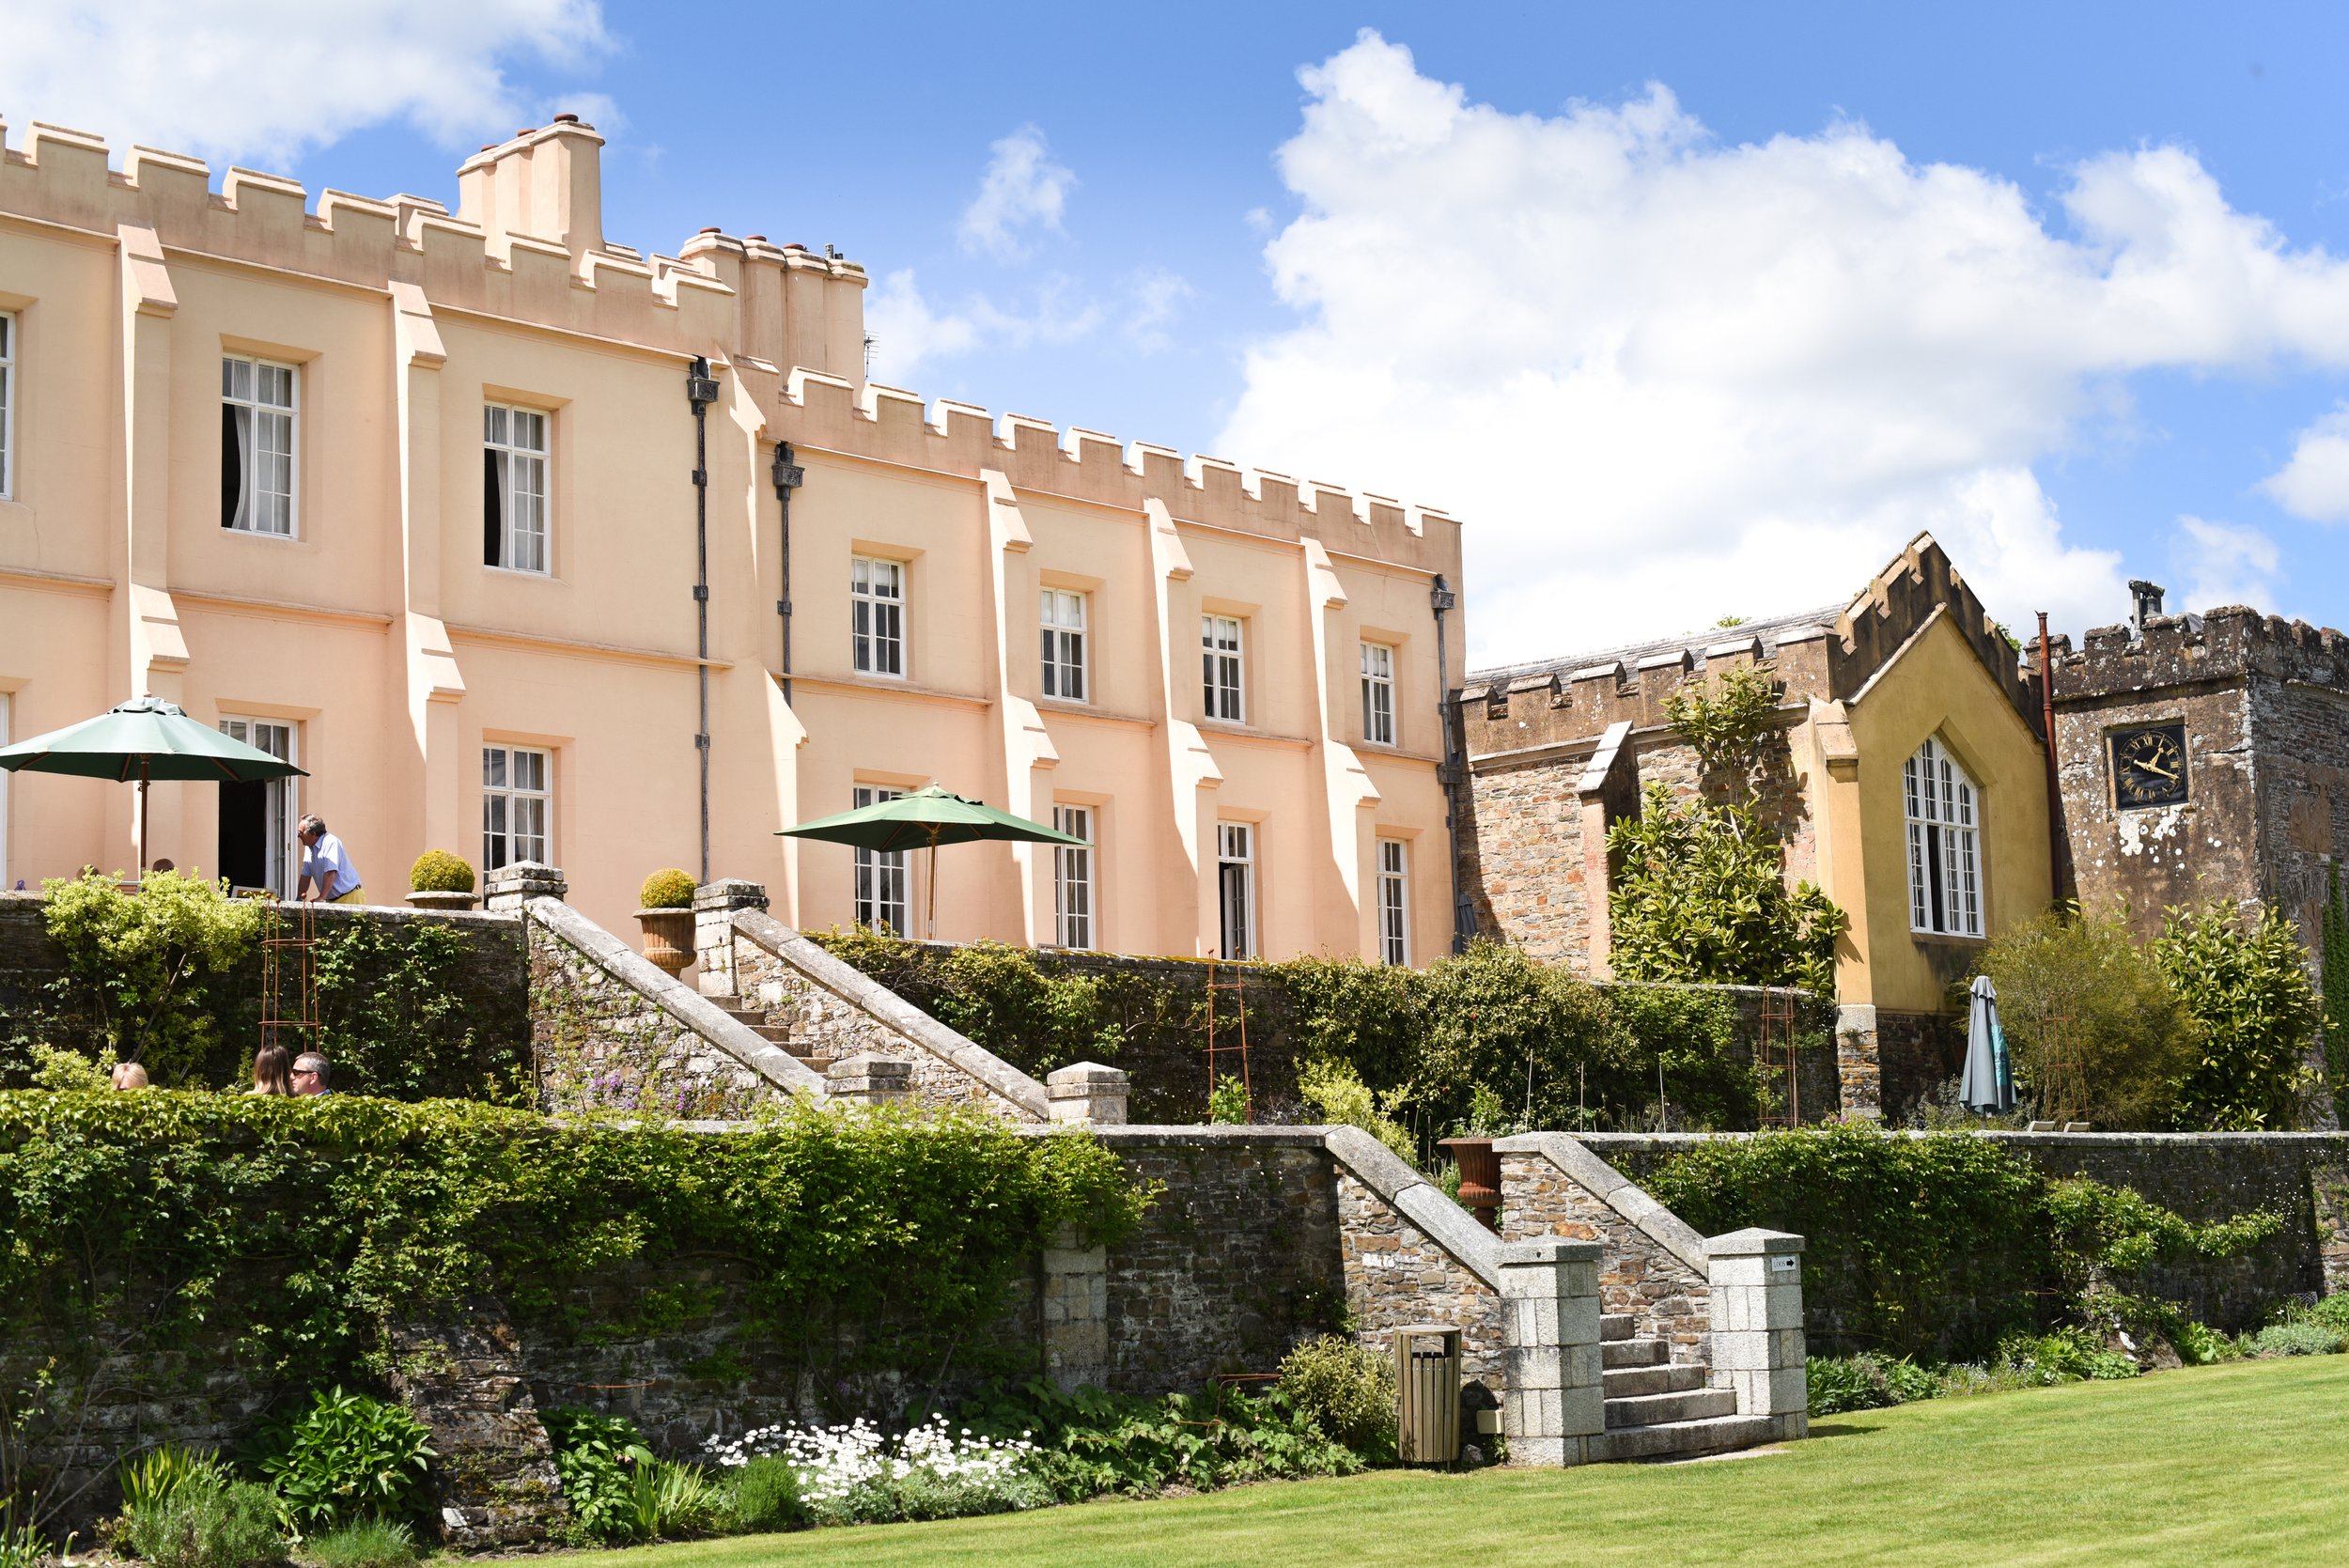 16_cThe Sunny Terraces at Pentillie Castle by Claire Tregaskis Photography.jpg